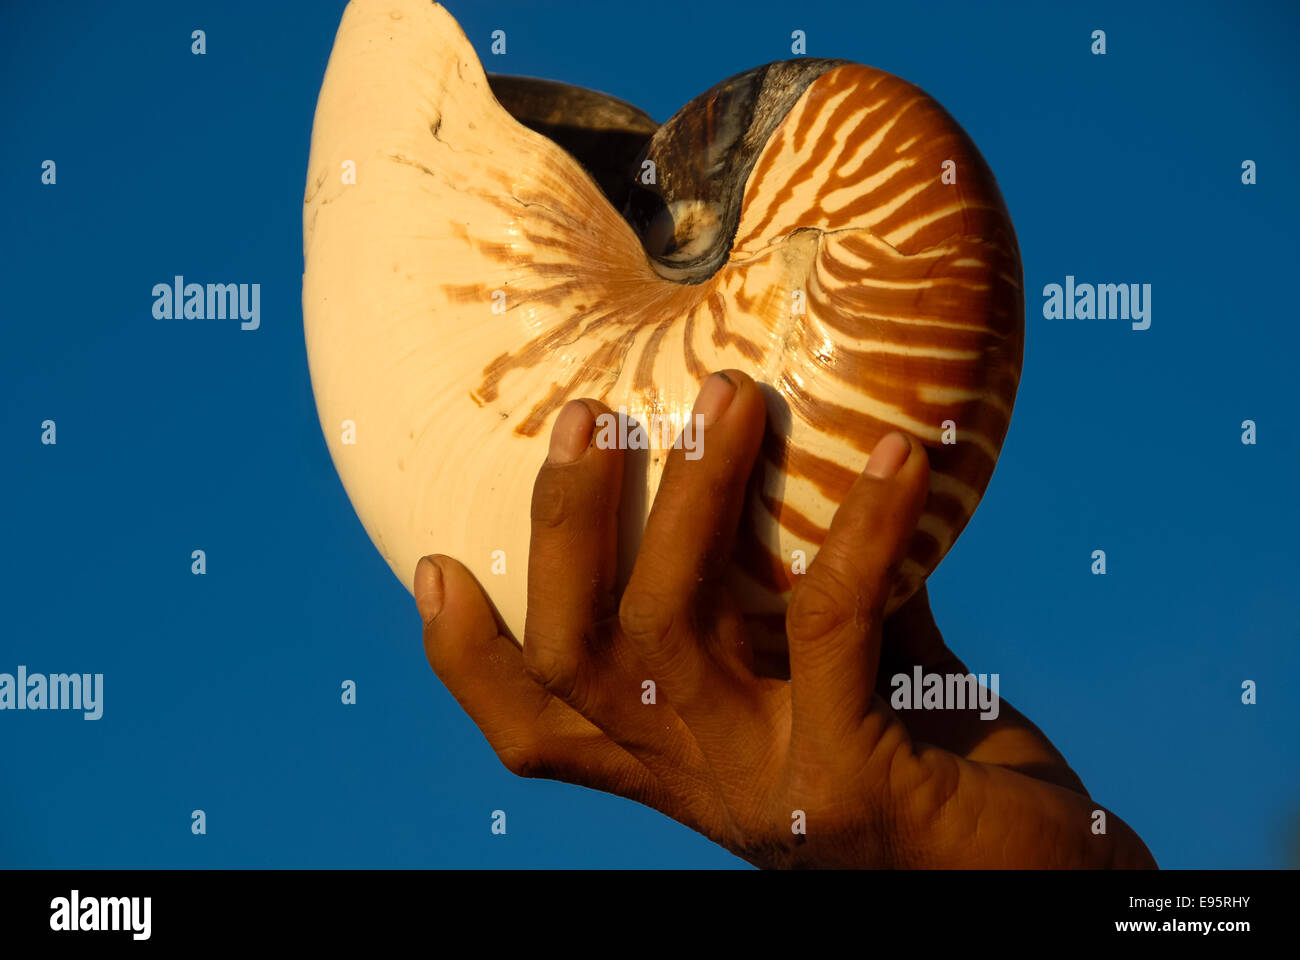 mollusc in hand against blue sky Stock Photo